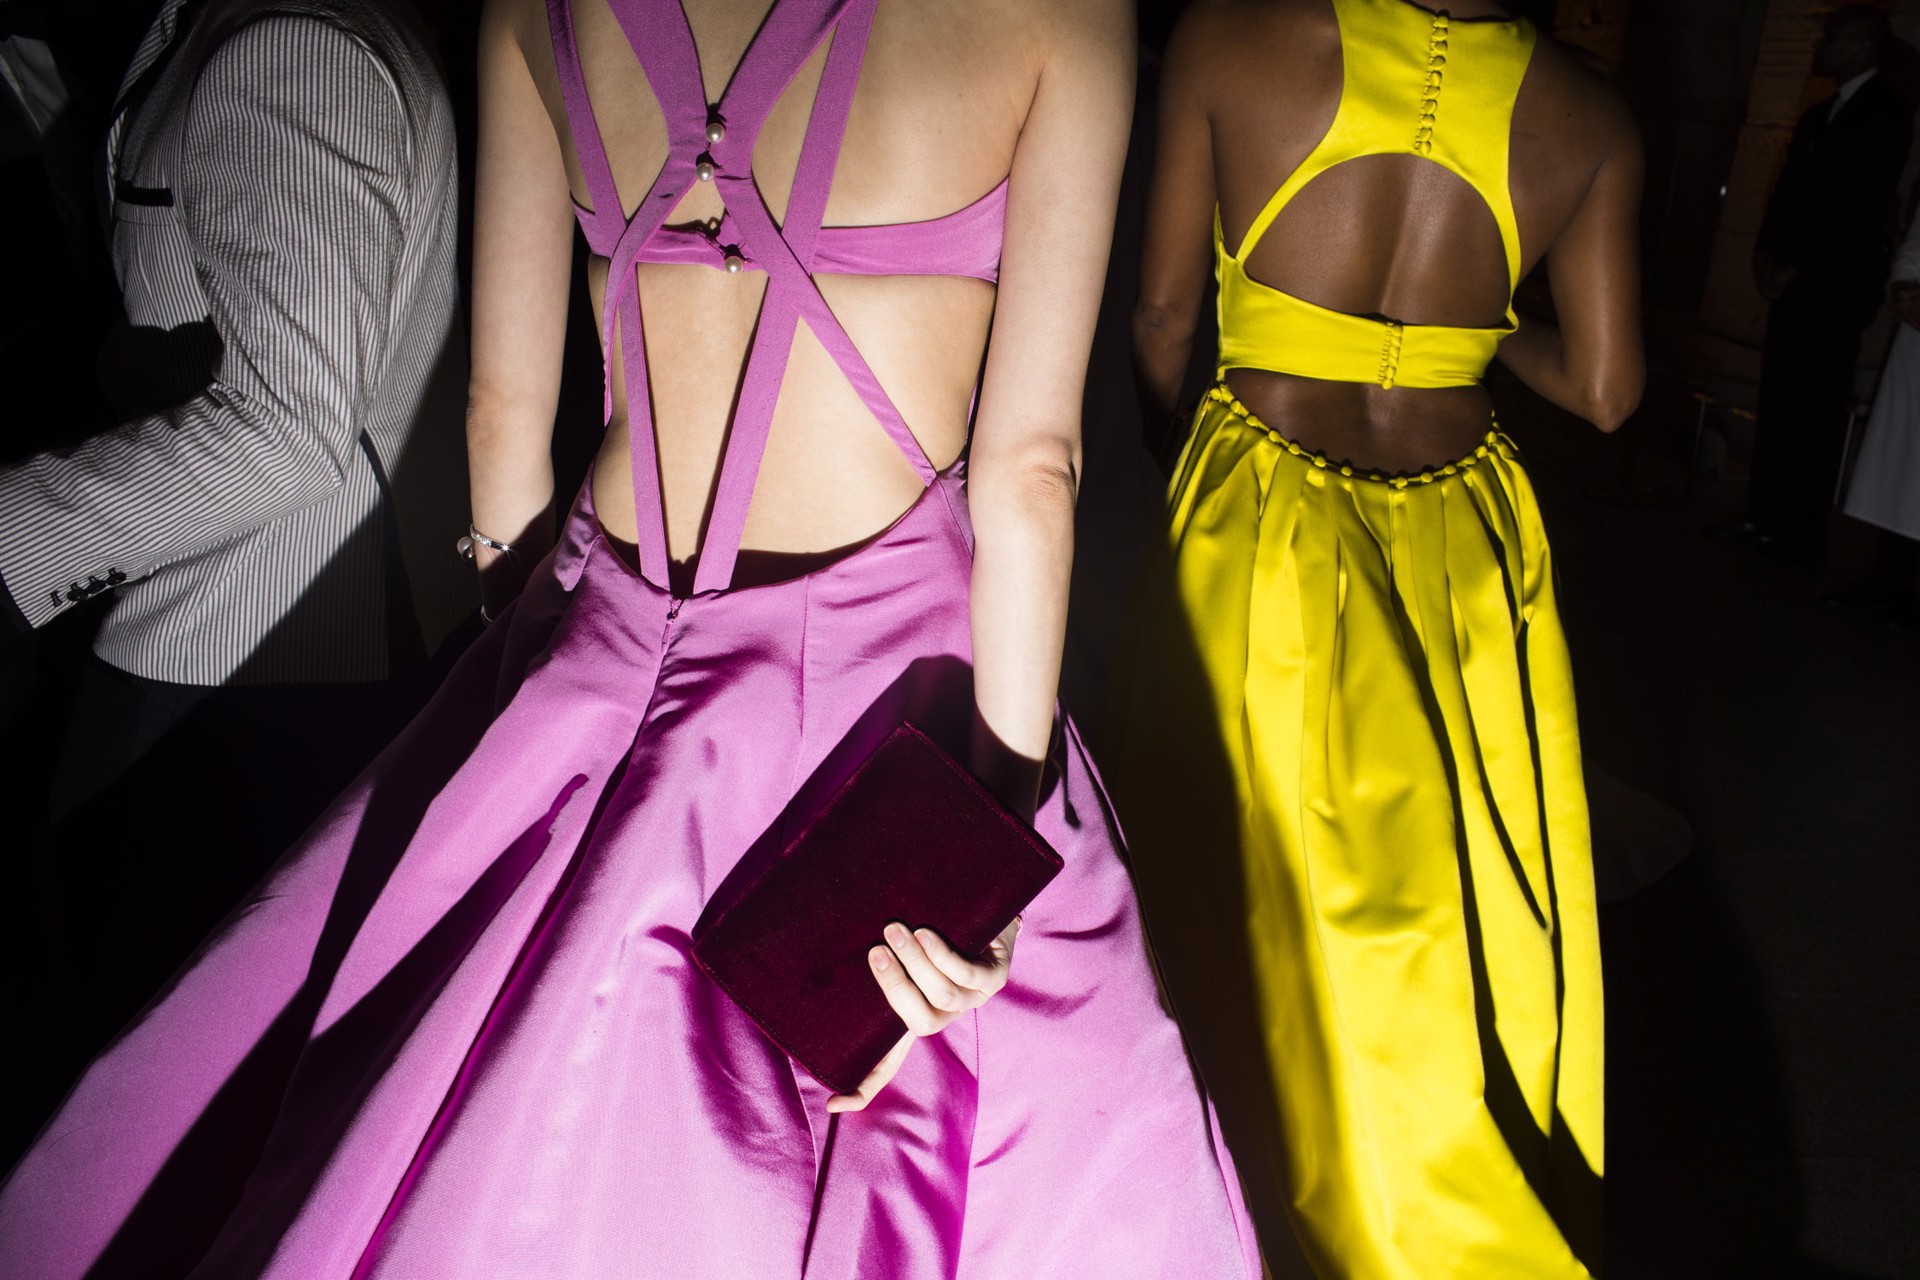 Leaving the Scene with Ming Xi and Gabrielle Union, Met Gala series, NYC by Landon Nordeman